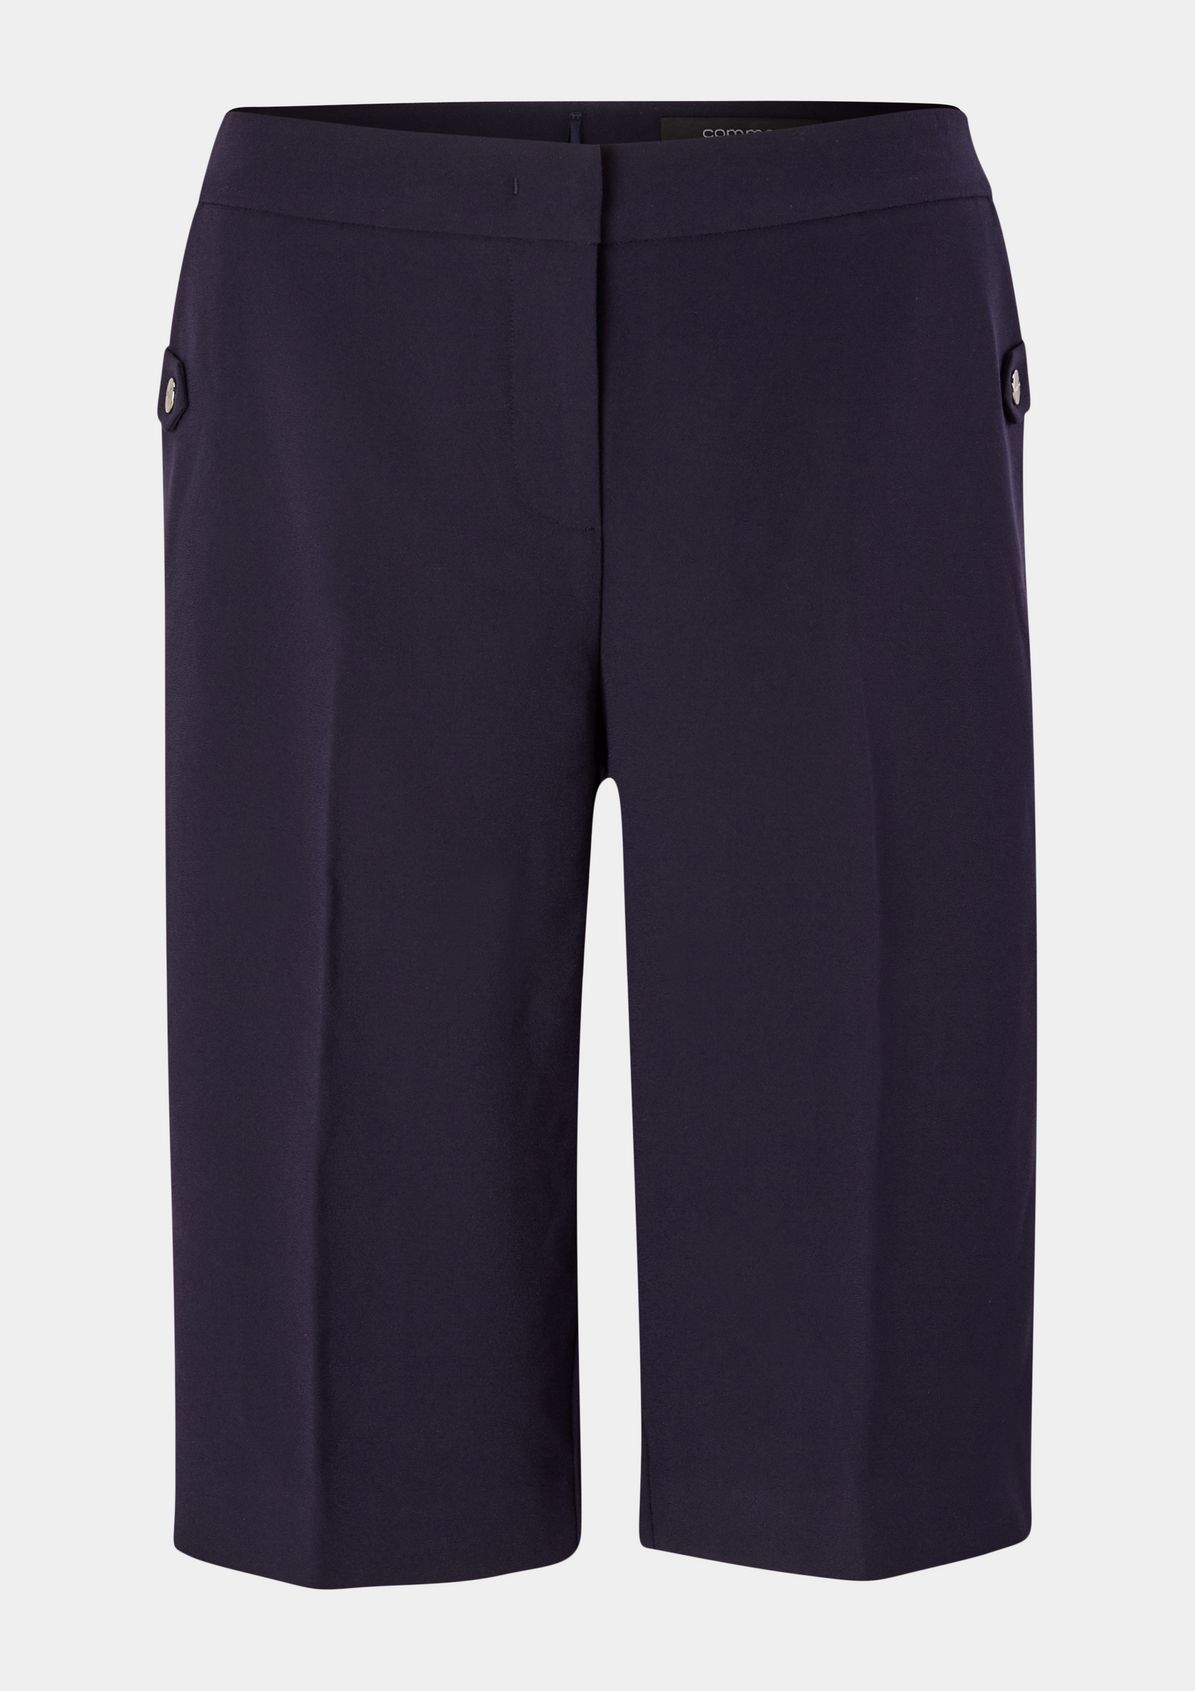 Elegant crêpe trousers with pressed pleats from comma